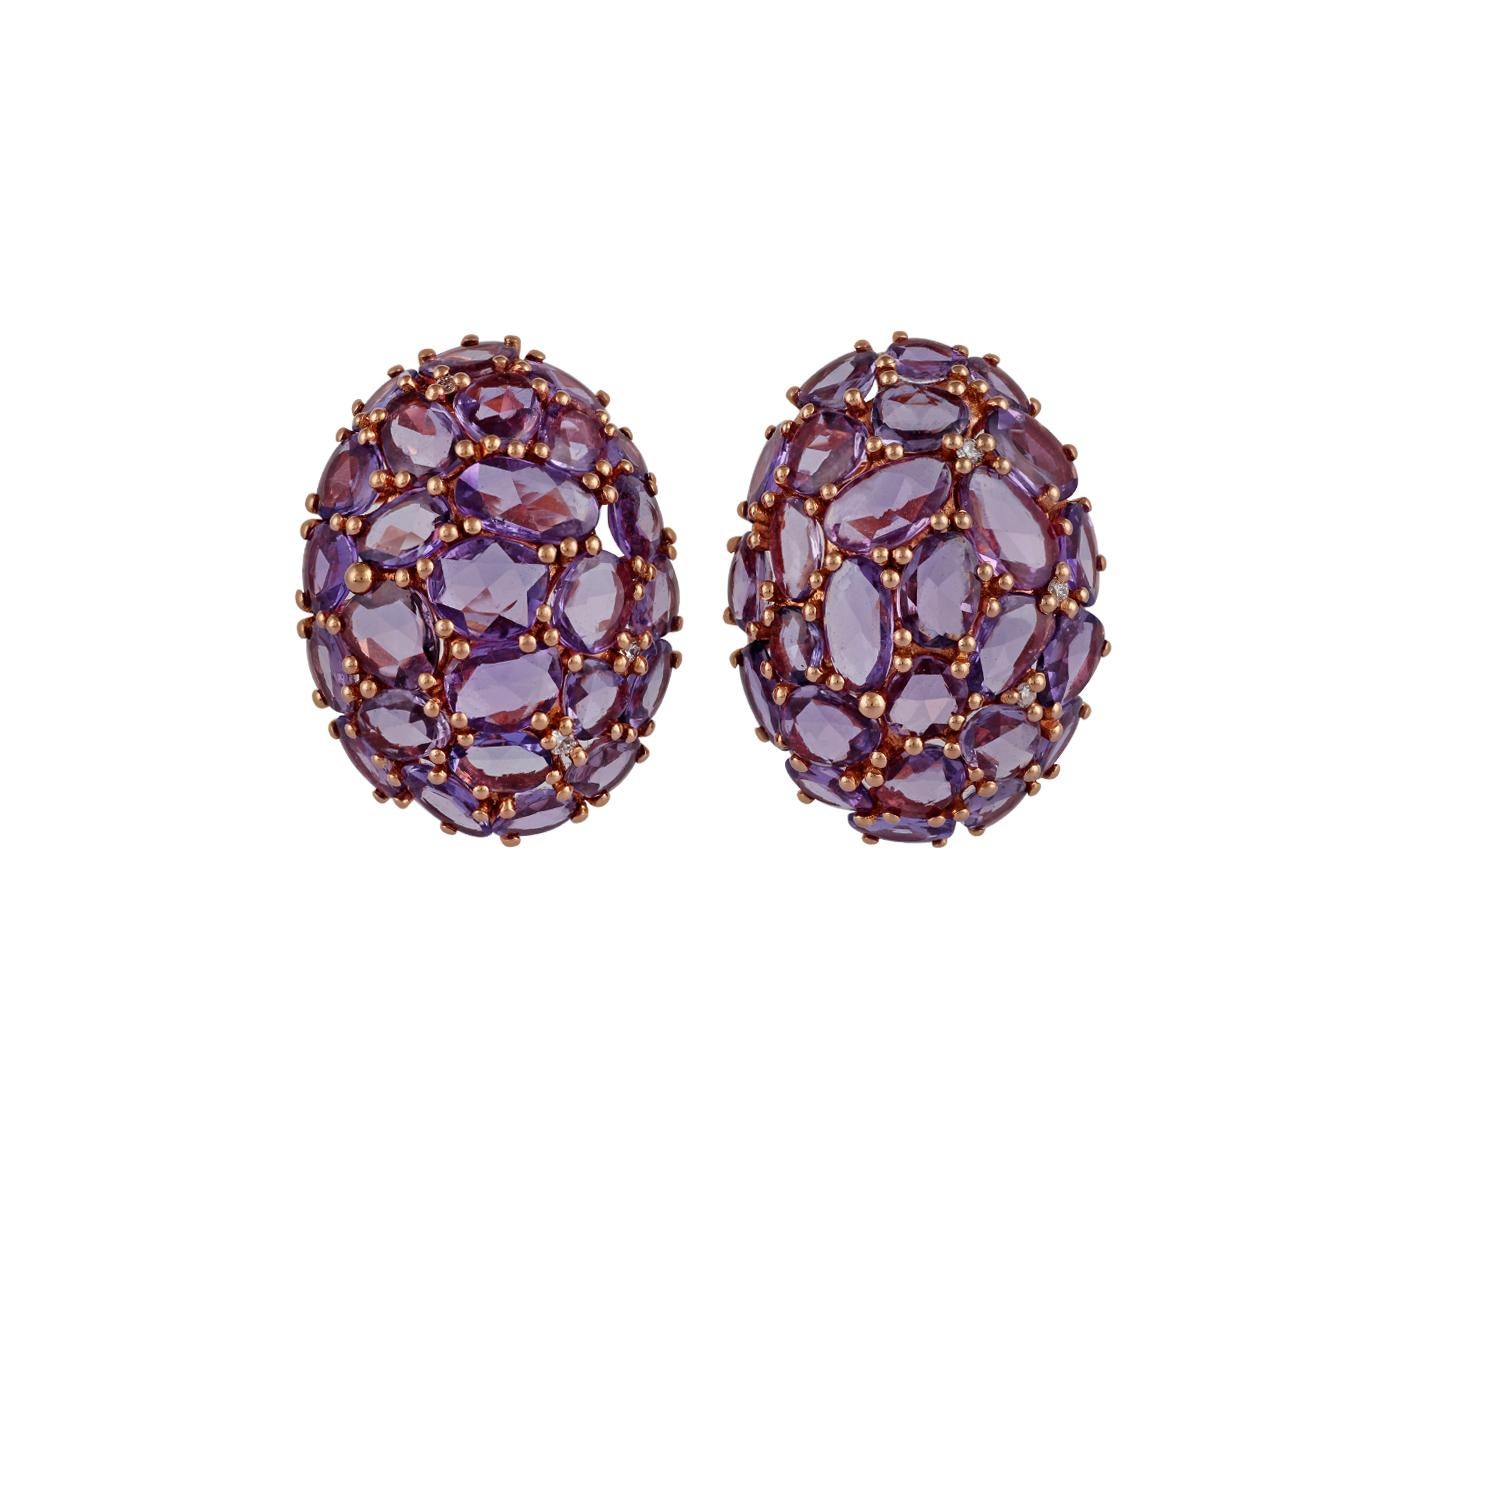 These are exclusive pink sapphire & diamond earrings studded in 18k rose gold features 52 pieces of rose cut pink sapphires weight 16.32 carats with 6 pieces of round shaped diamonds weight 0.06 carats, these entire earrings made of 18k rose gold